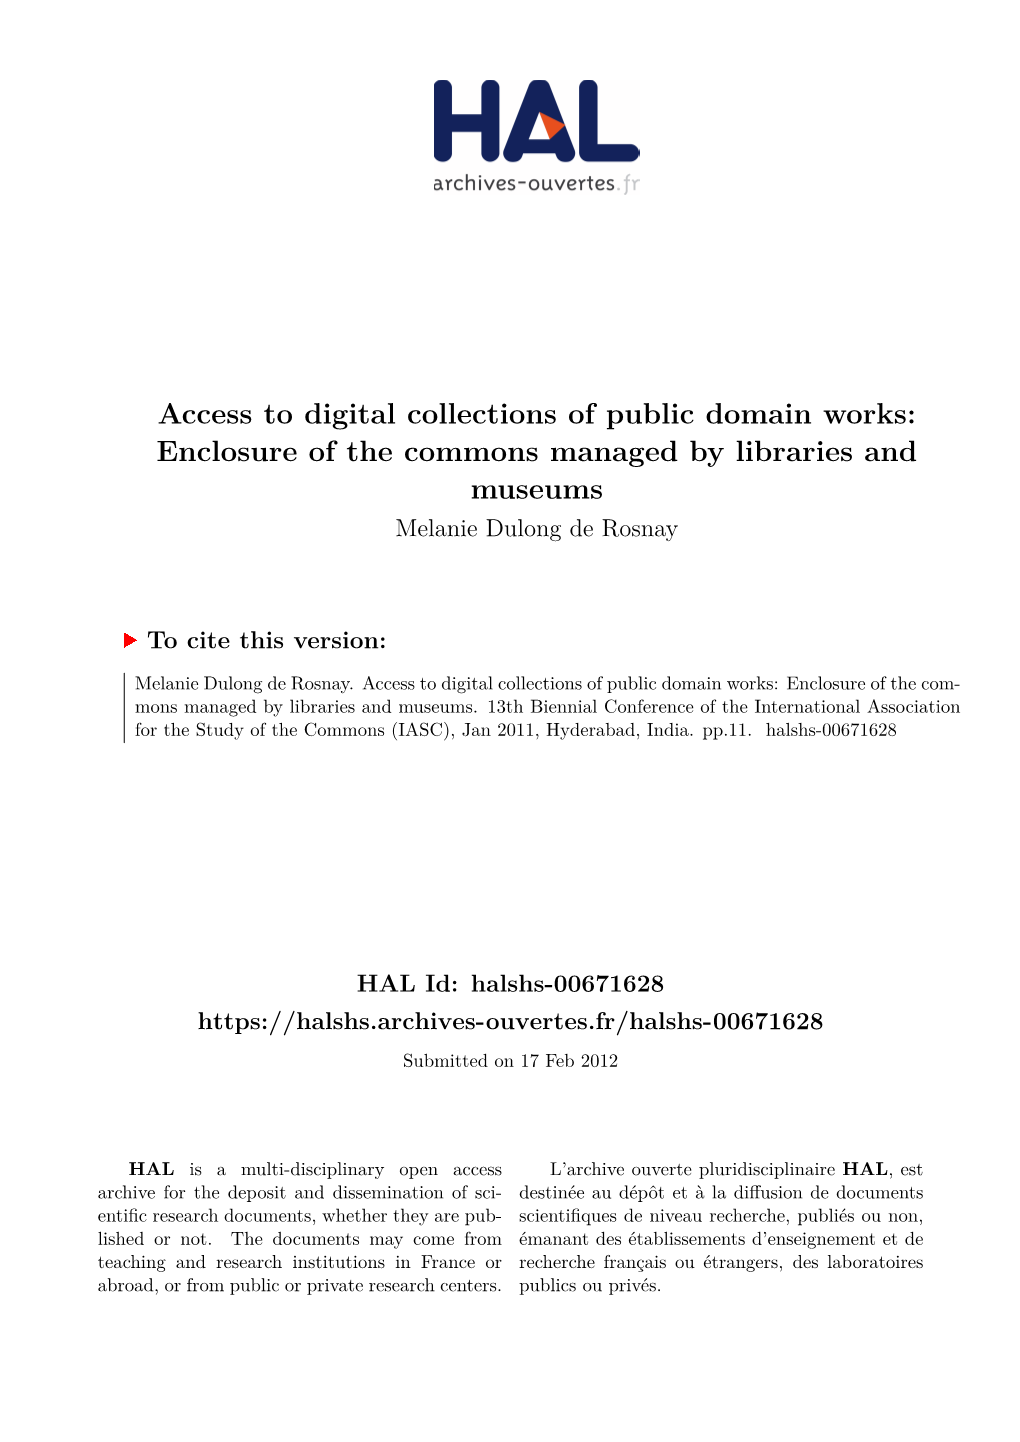 Access to Digital Collections of Public Domain Works: Enclosure of the Commons Managed by Libraries and Museums Melanie Dulong De Rosnay